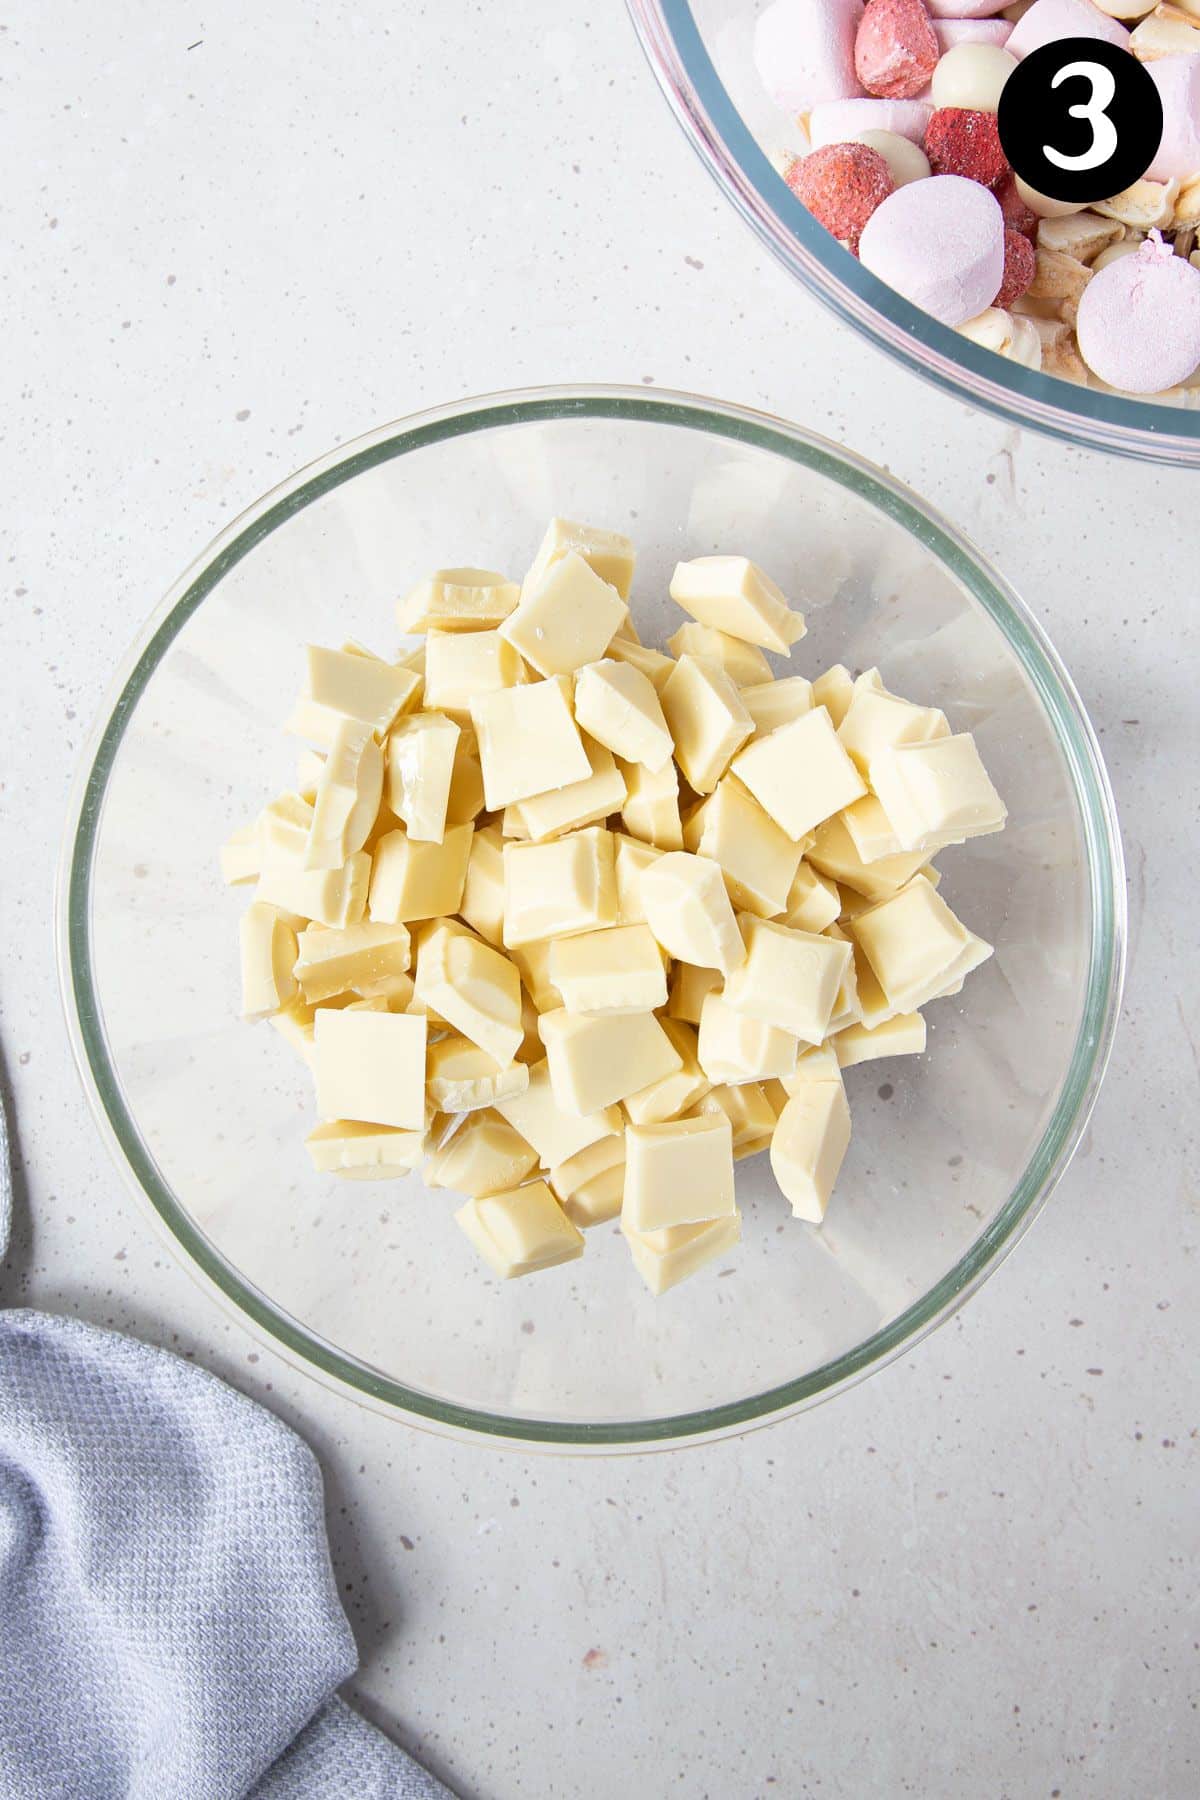 pieces of white chocolate, broken into a glass bowl.